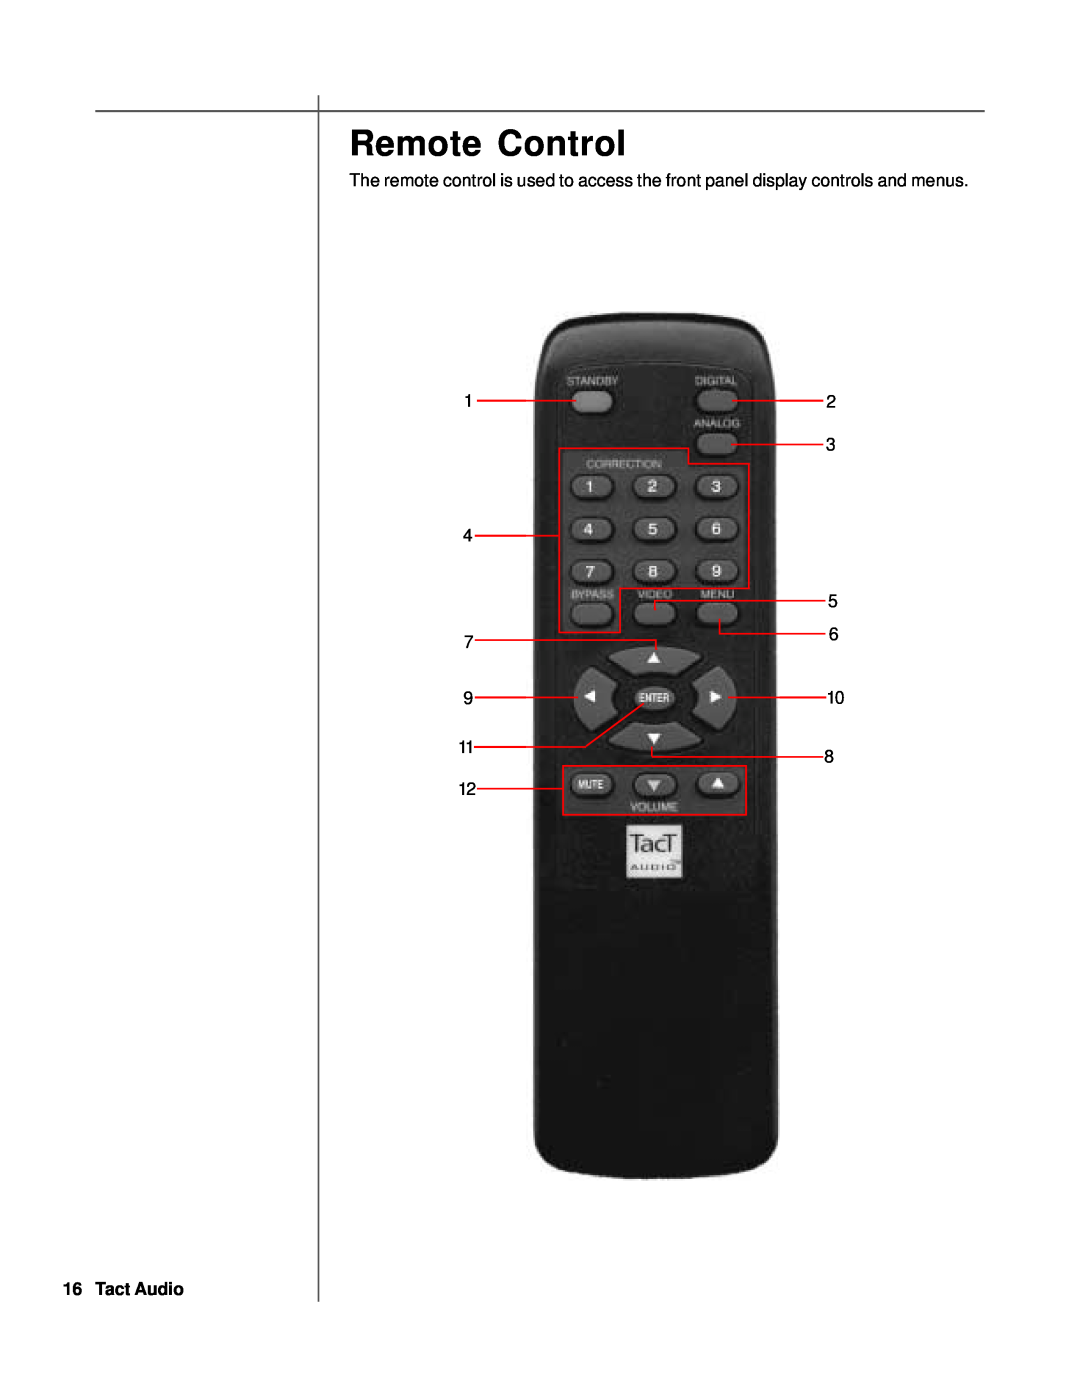 TacT Audio S2150, M2150 owner manual Remote Control, Tact Audio 